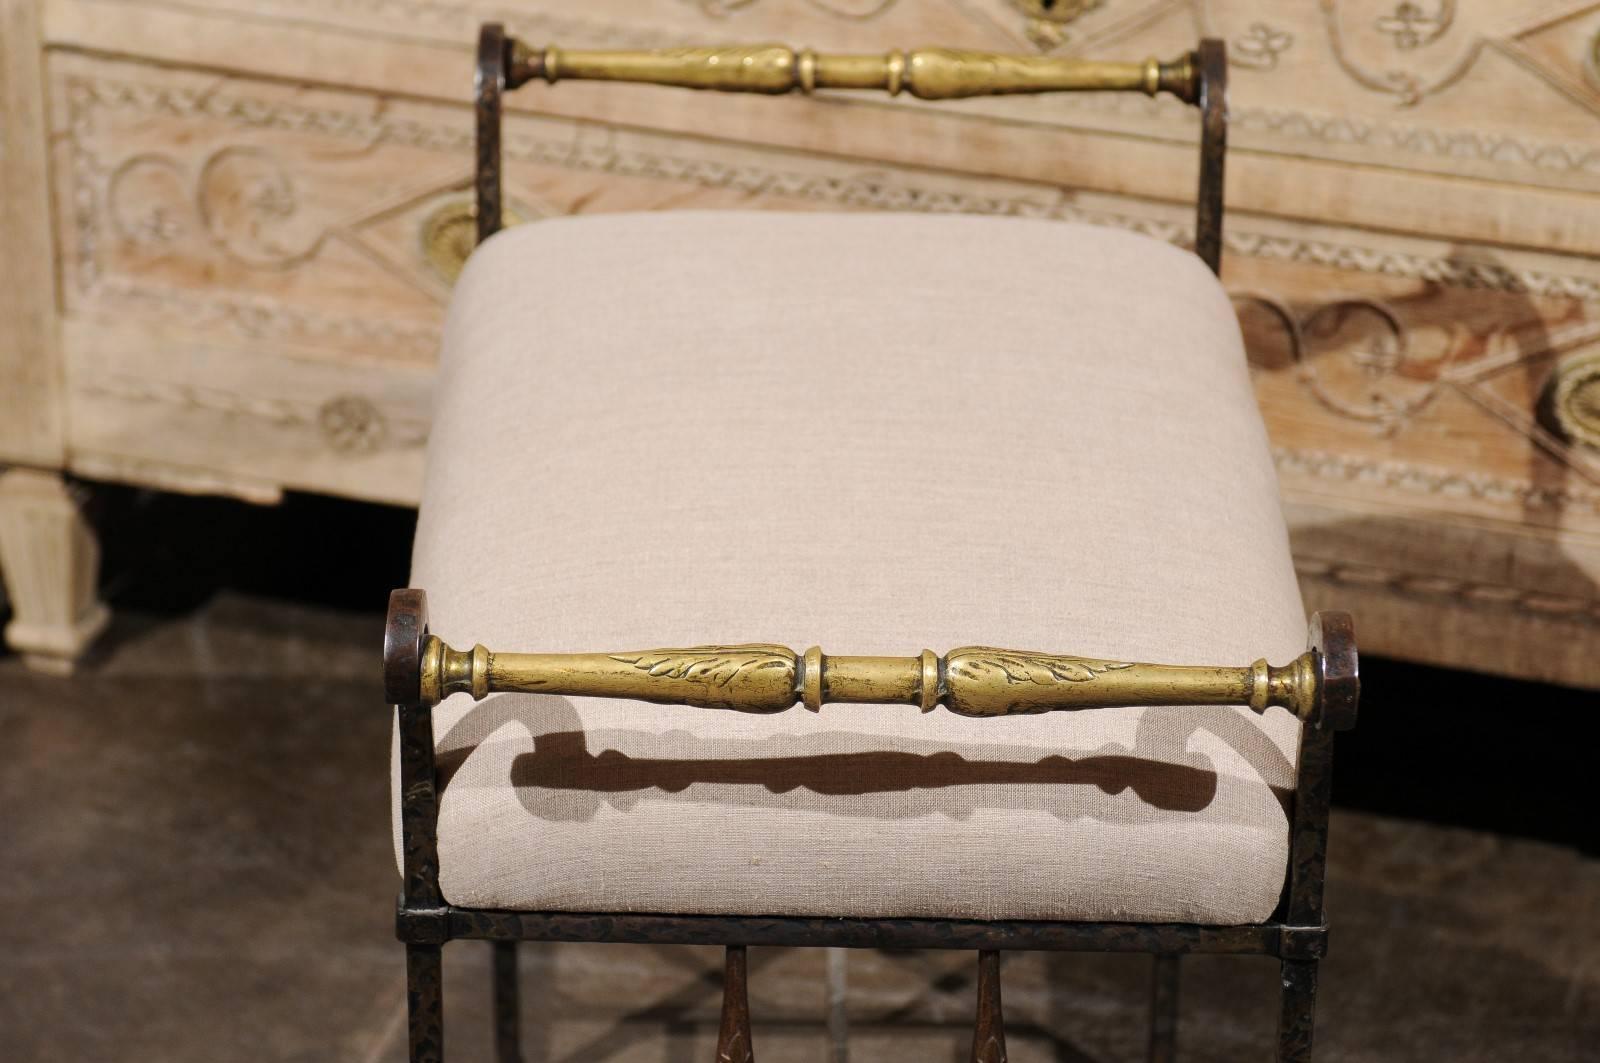 Upholstery Italian 1920s Wrought-Iron Upholstered Bench with Bronze Accents